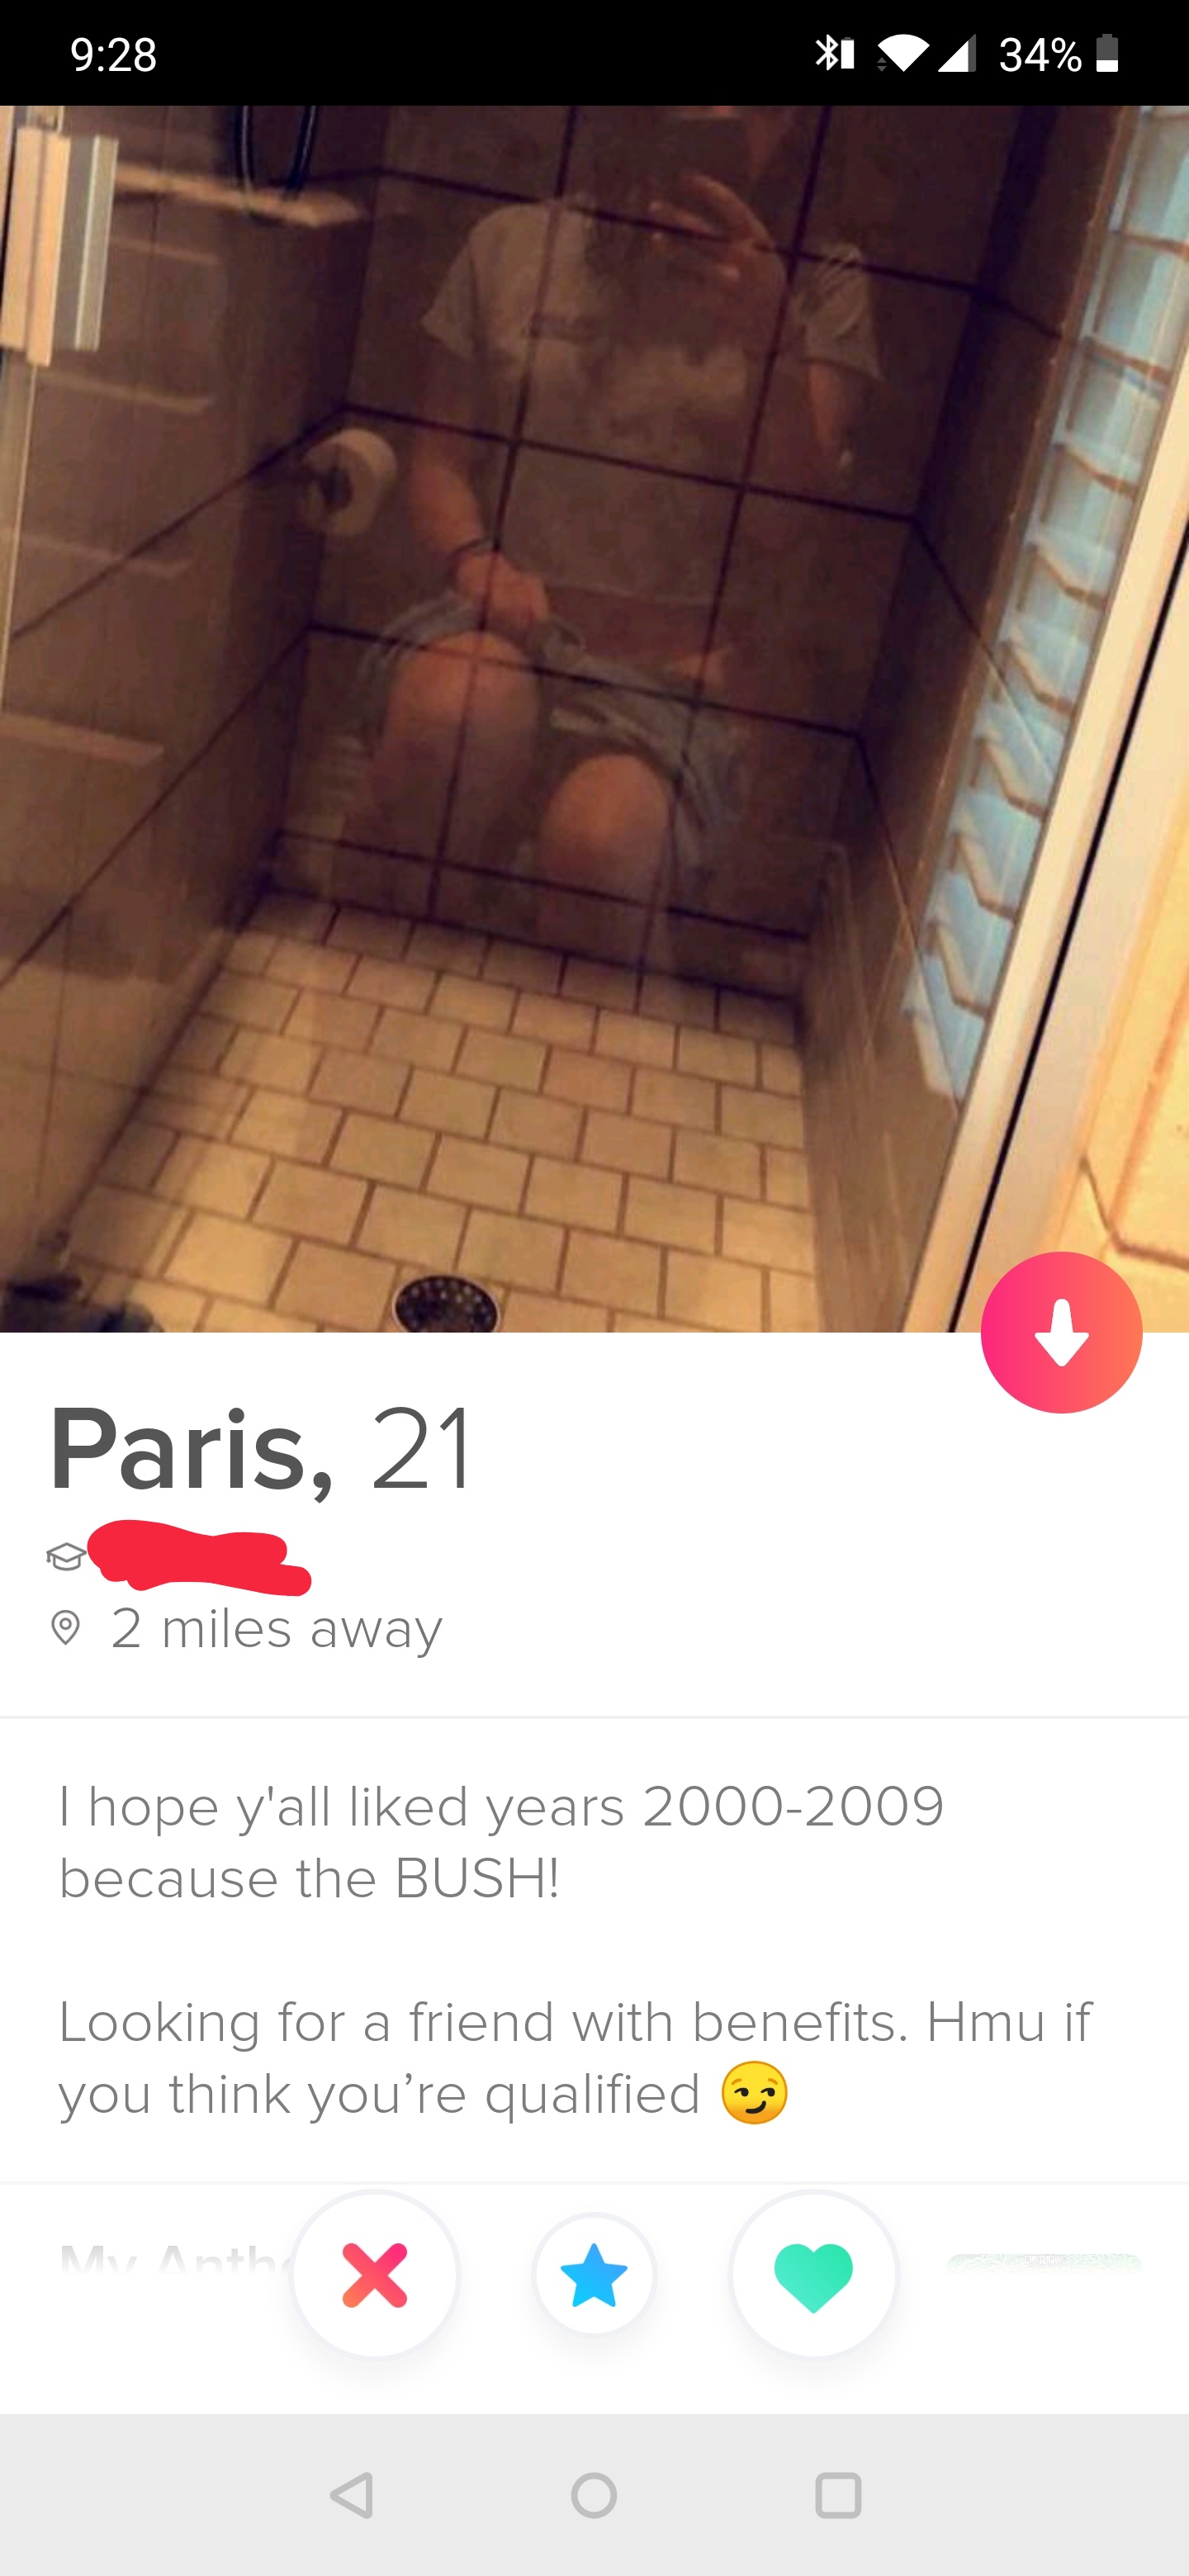 tinder - screenshot - 9.28 34%. Paris, 21 2 miles away I hope y'all d years 20002009 because the Bushi Looking for a friend with benefits. Hmu if you think you're qualified